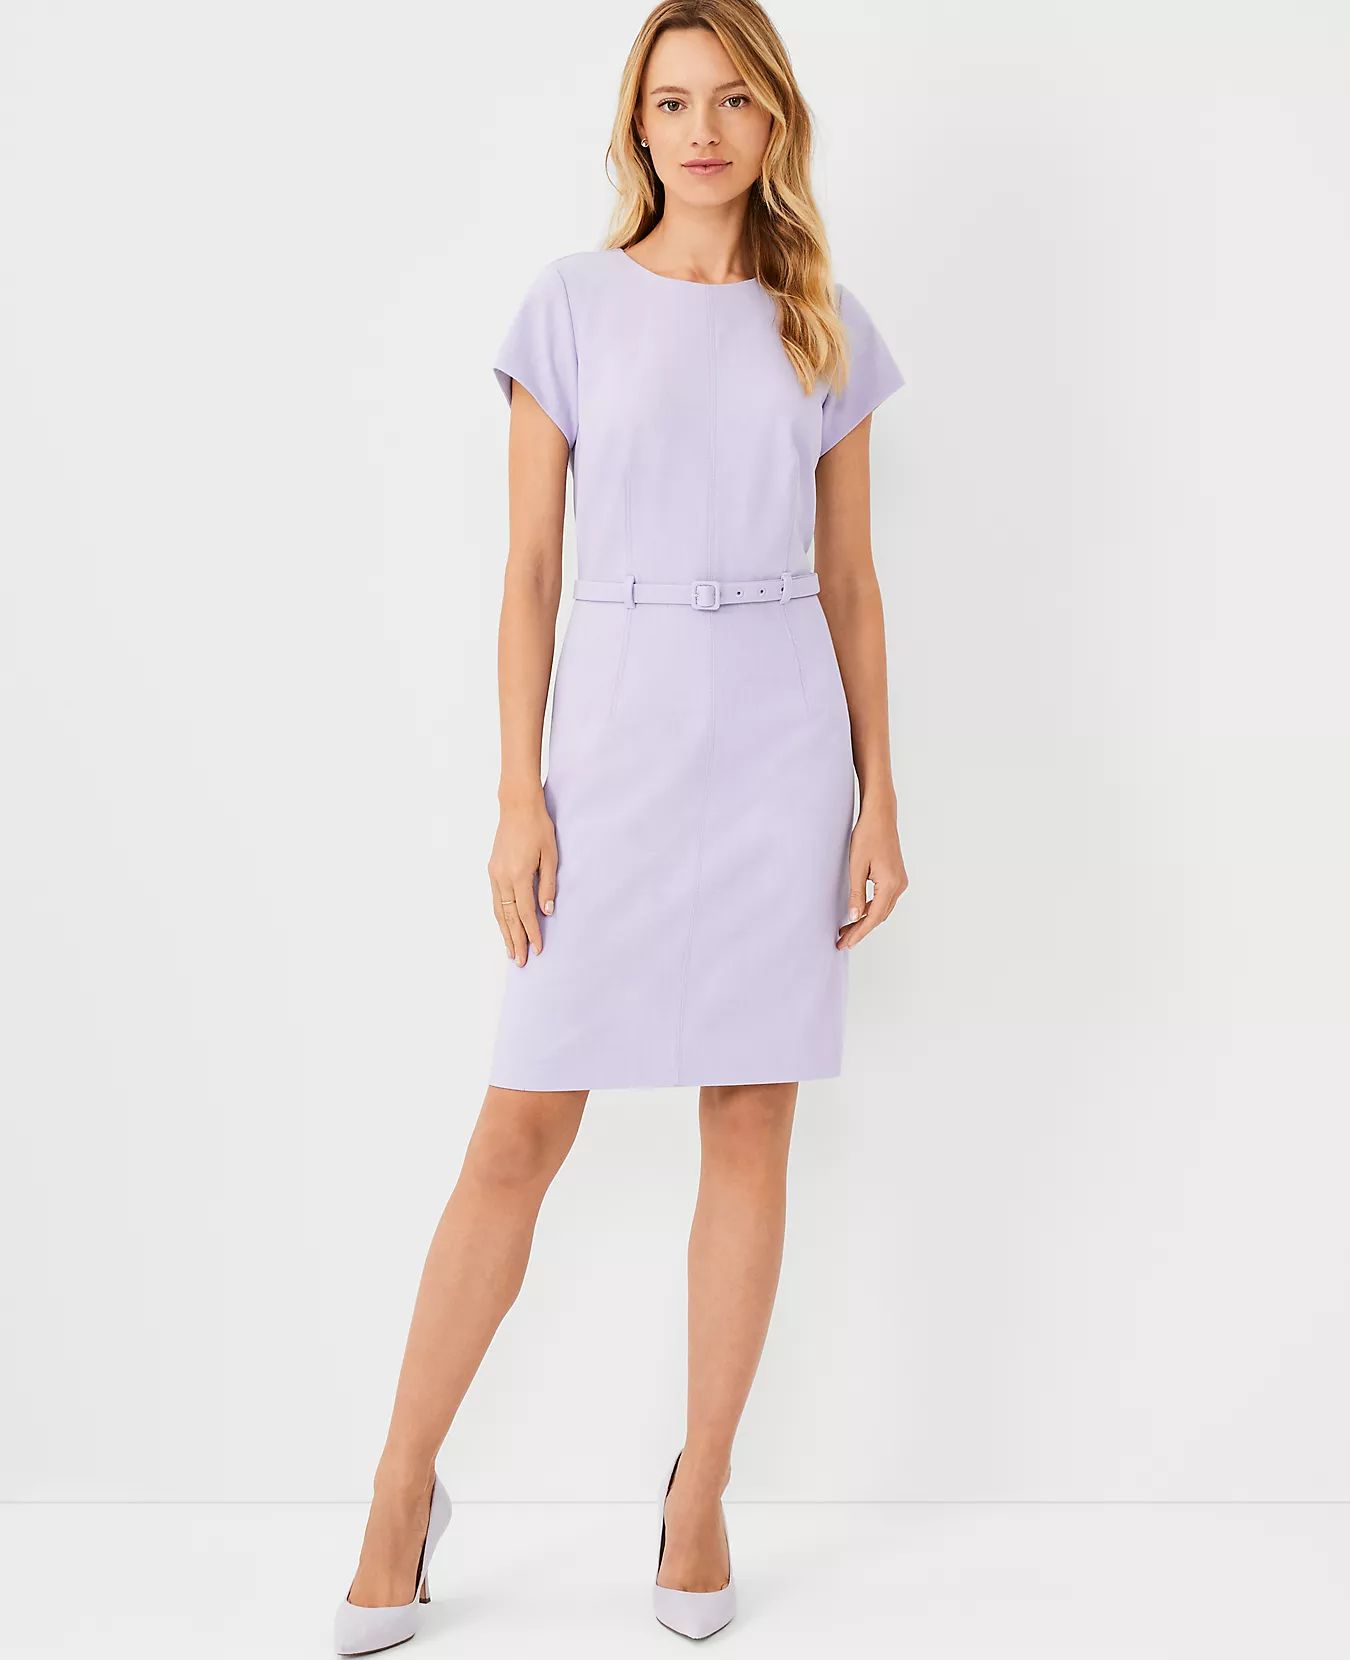 The Petite Seamed Belted Dress in Bi-Stretch | Ann Taylor | Ann Taylor (US)